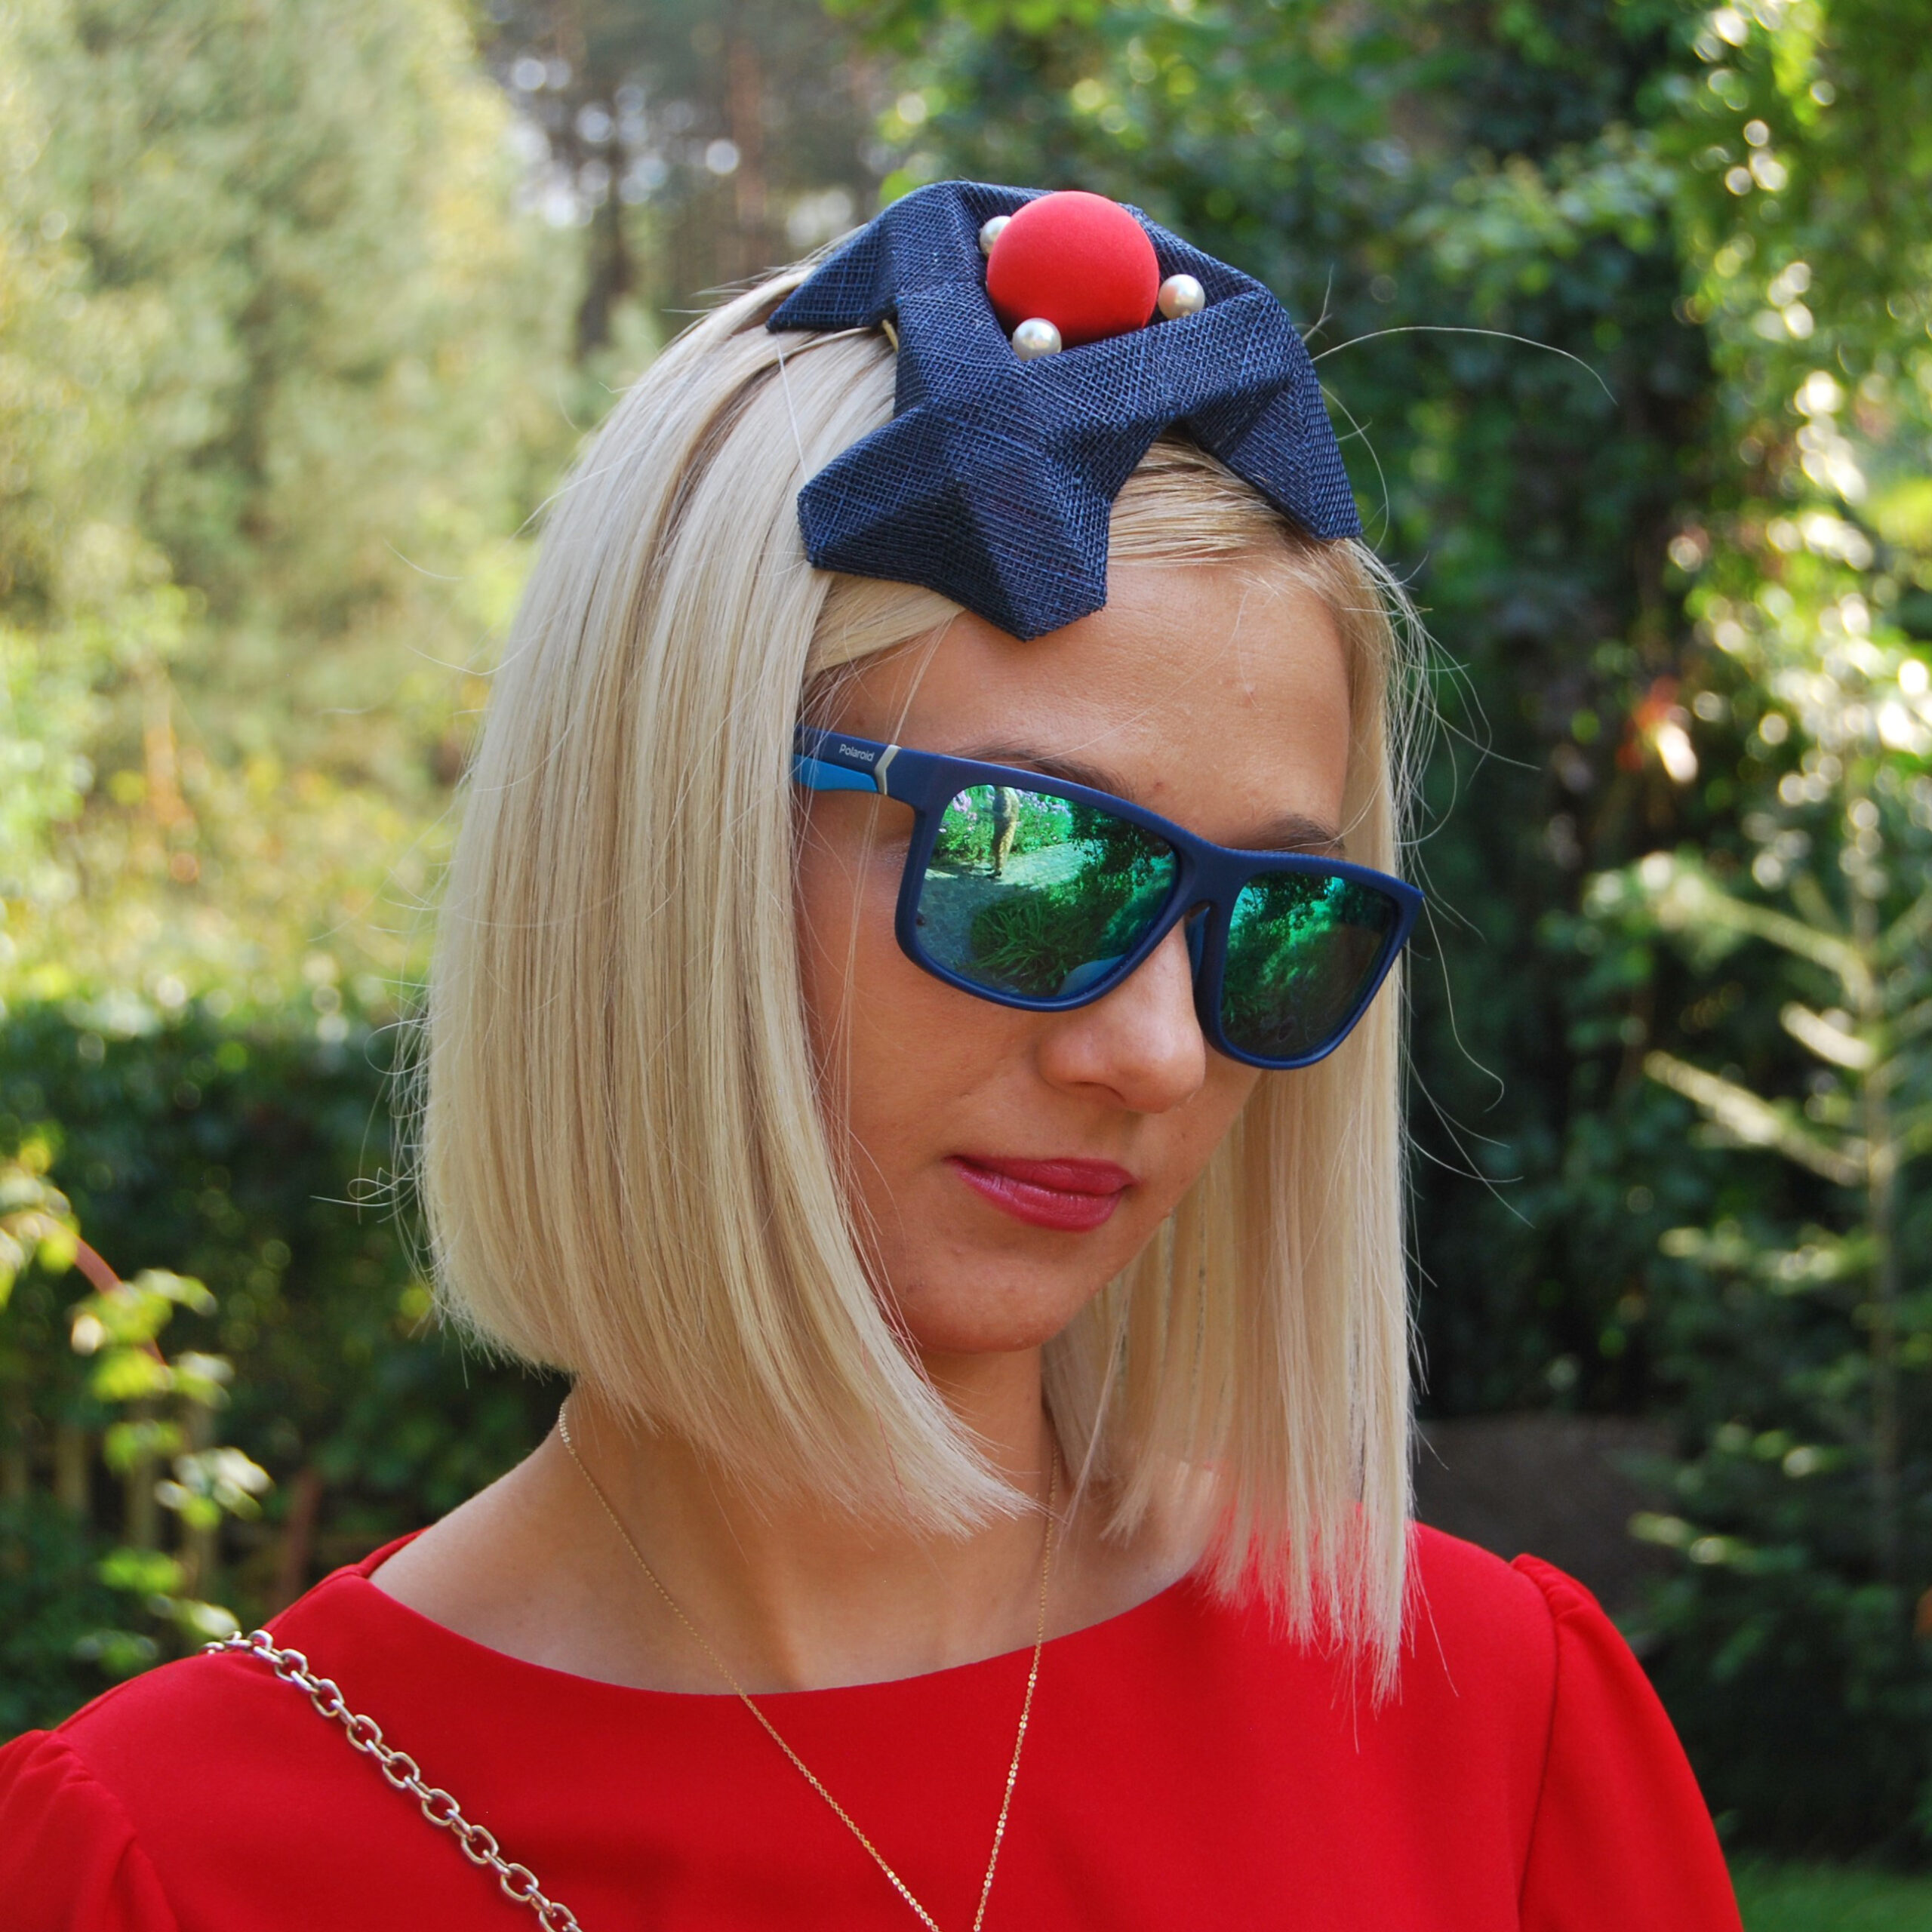 A very modern look combines a bespoke origami fascinator with a red dress, blue mirror shades and straight platine blond hair